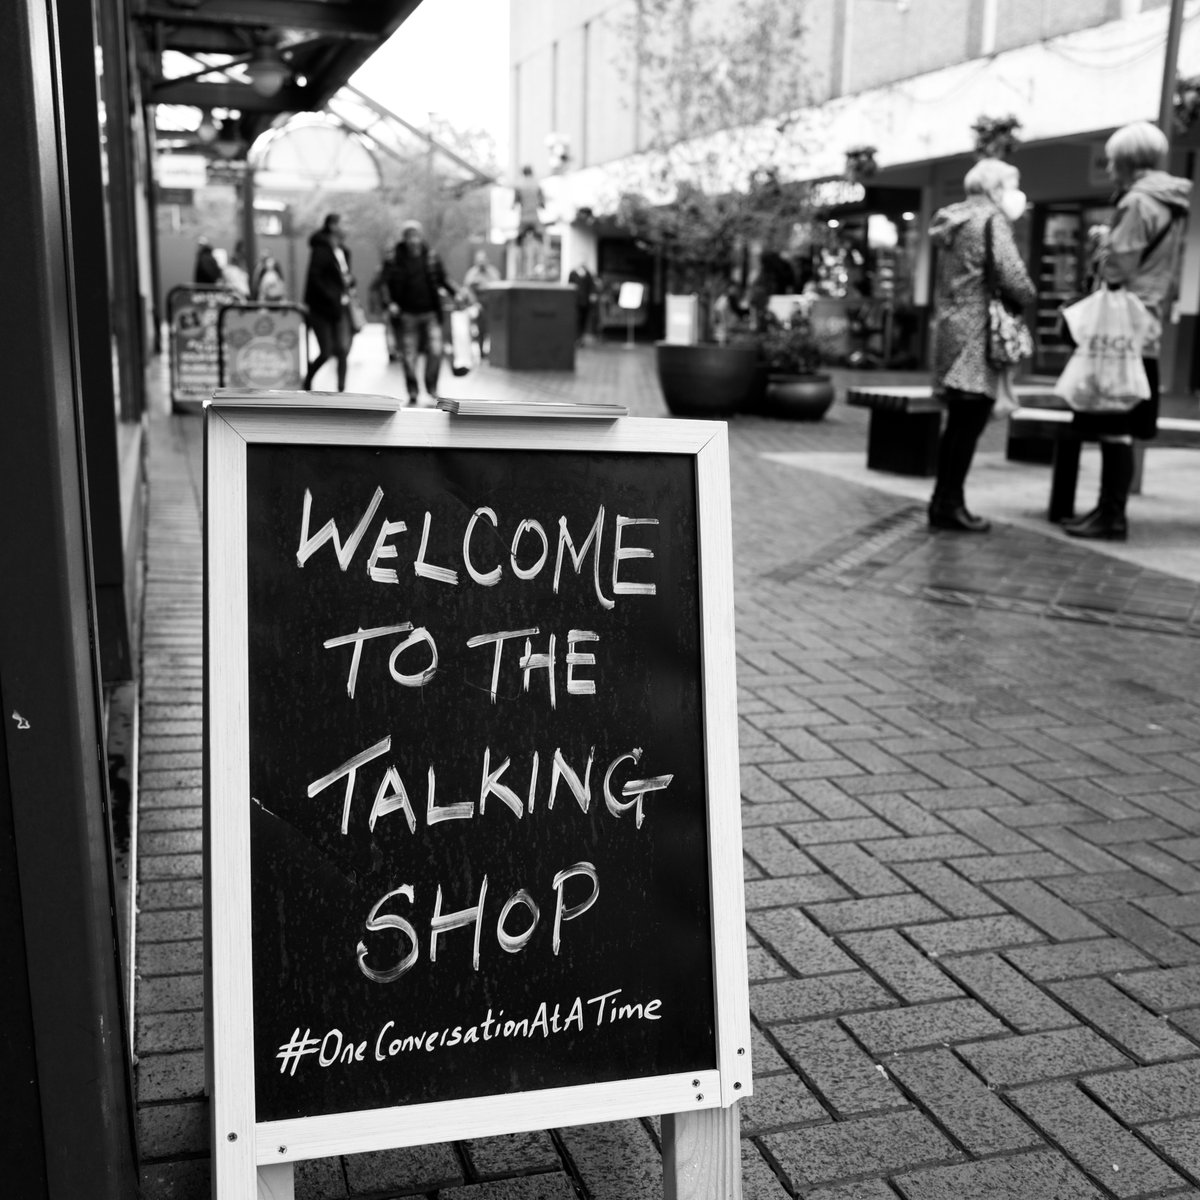 Calling all creatives. All disciplines. From across the creative sector across Wales. The Talking Shop #Blackwood is finally open Here's how you can get involved a) Advertise & promote your work from sticking up a poster and bringing in your flyers (A thread)